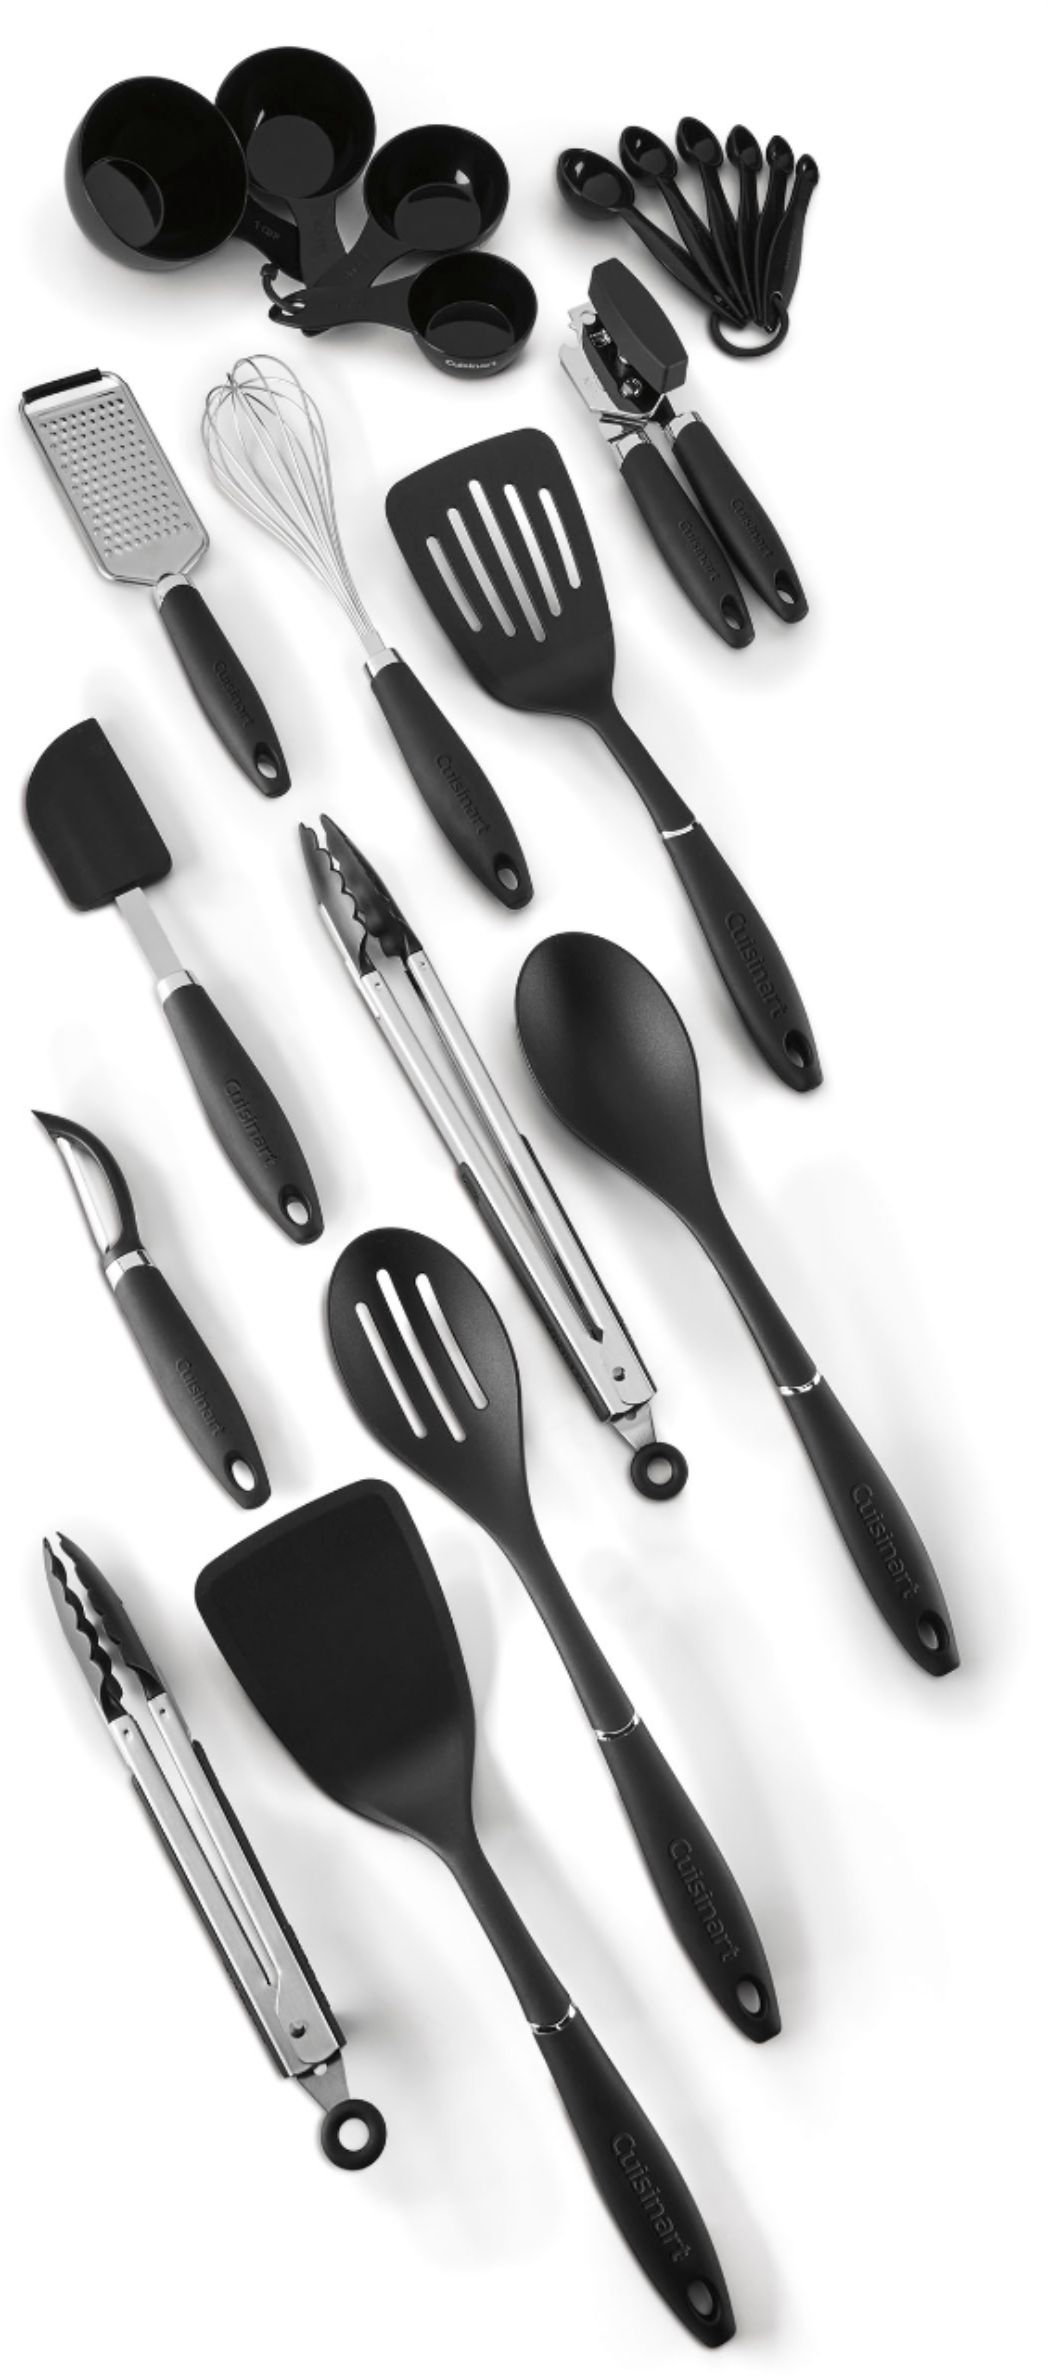 Cuisinart 10-Piece Plastic Measuring Cups & Spoons Set Black - ShopStyle  Pastry & Baking Tools